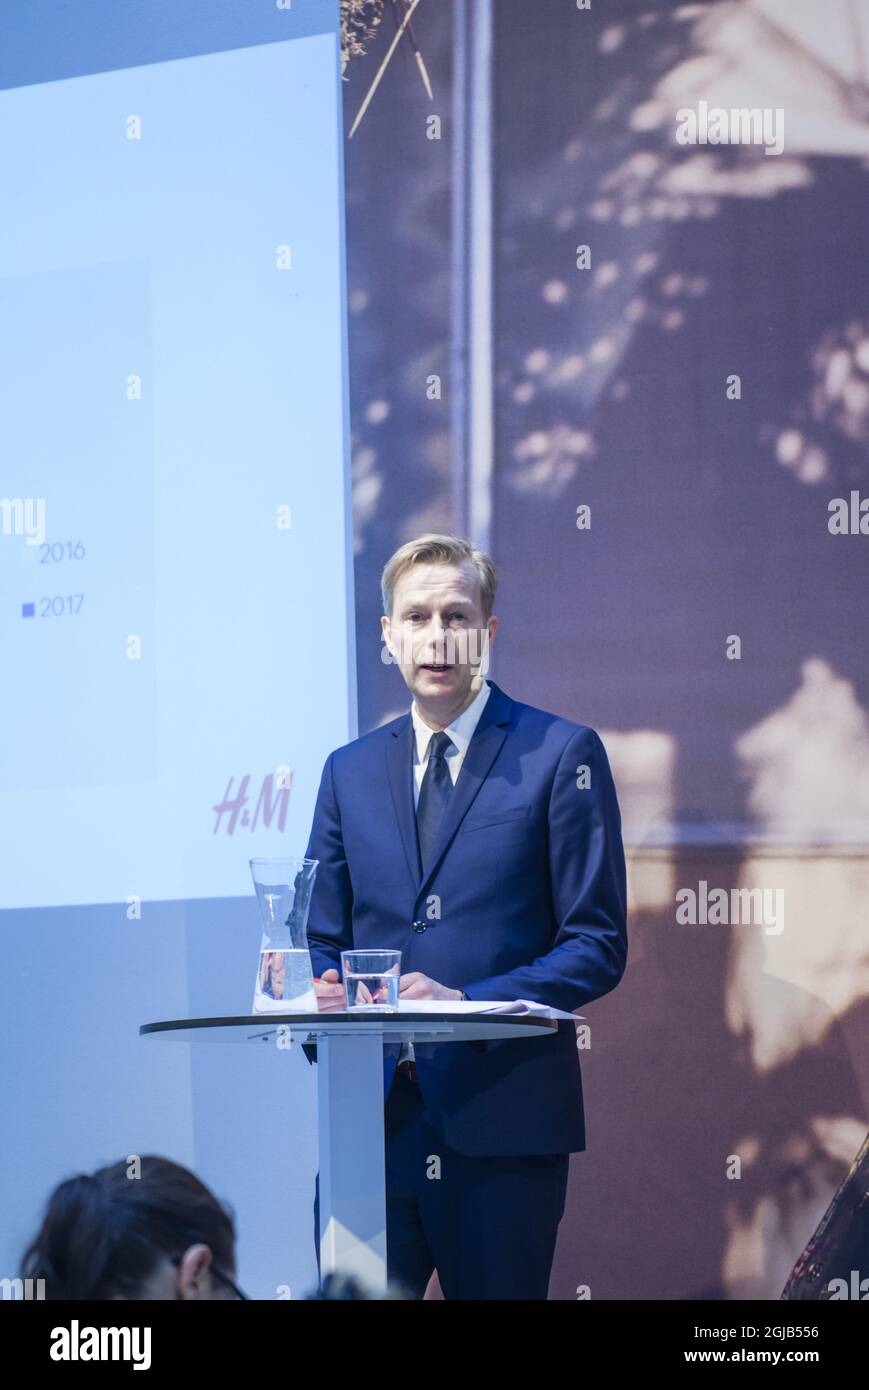 STOCKHOLM 2018-01-31 Nils Vinge , IR executive of HM ,during the presentation of the company's financial report in Stockholm, Sweden on Wednesday Foto: Marc Femenia / TT / kod 10570  Stock Photo